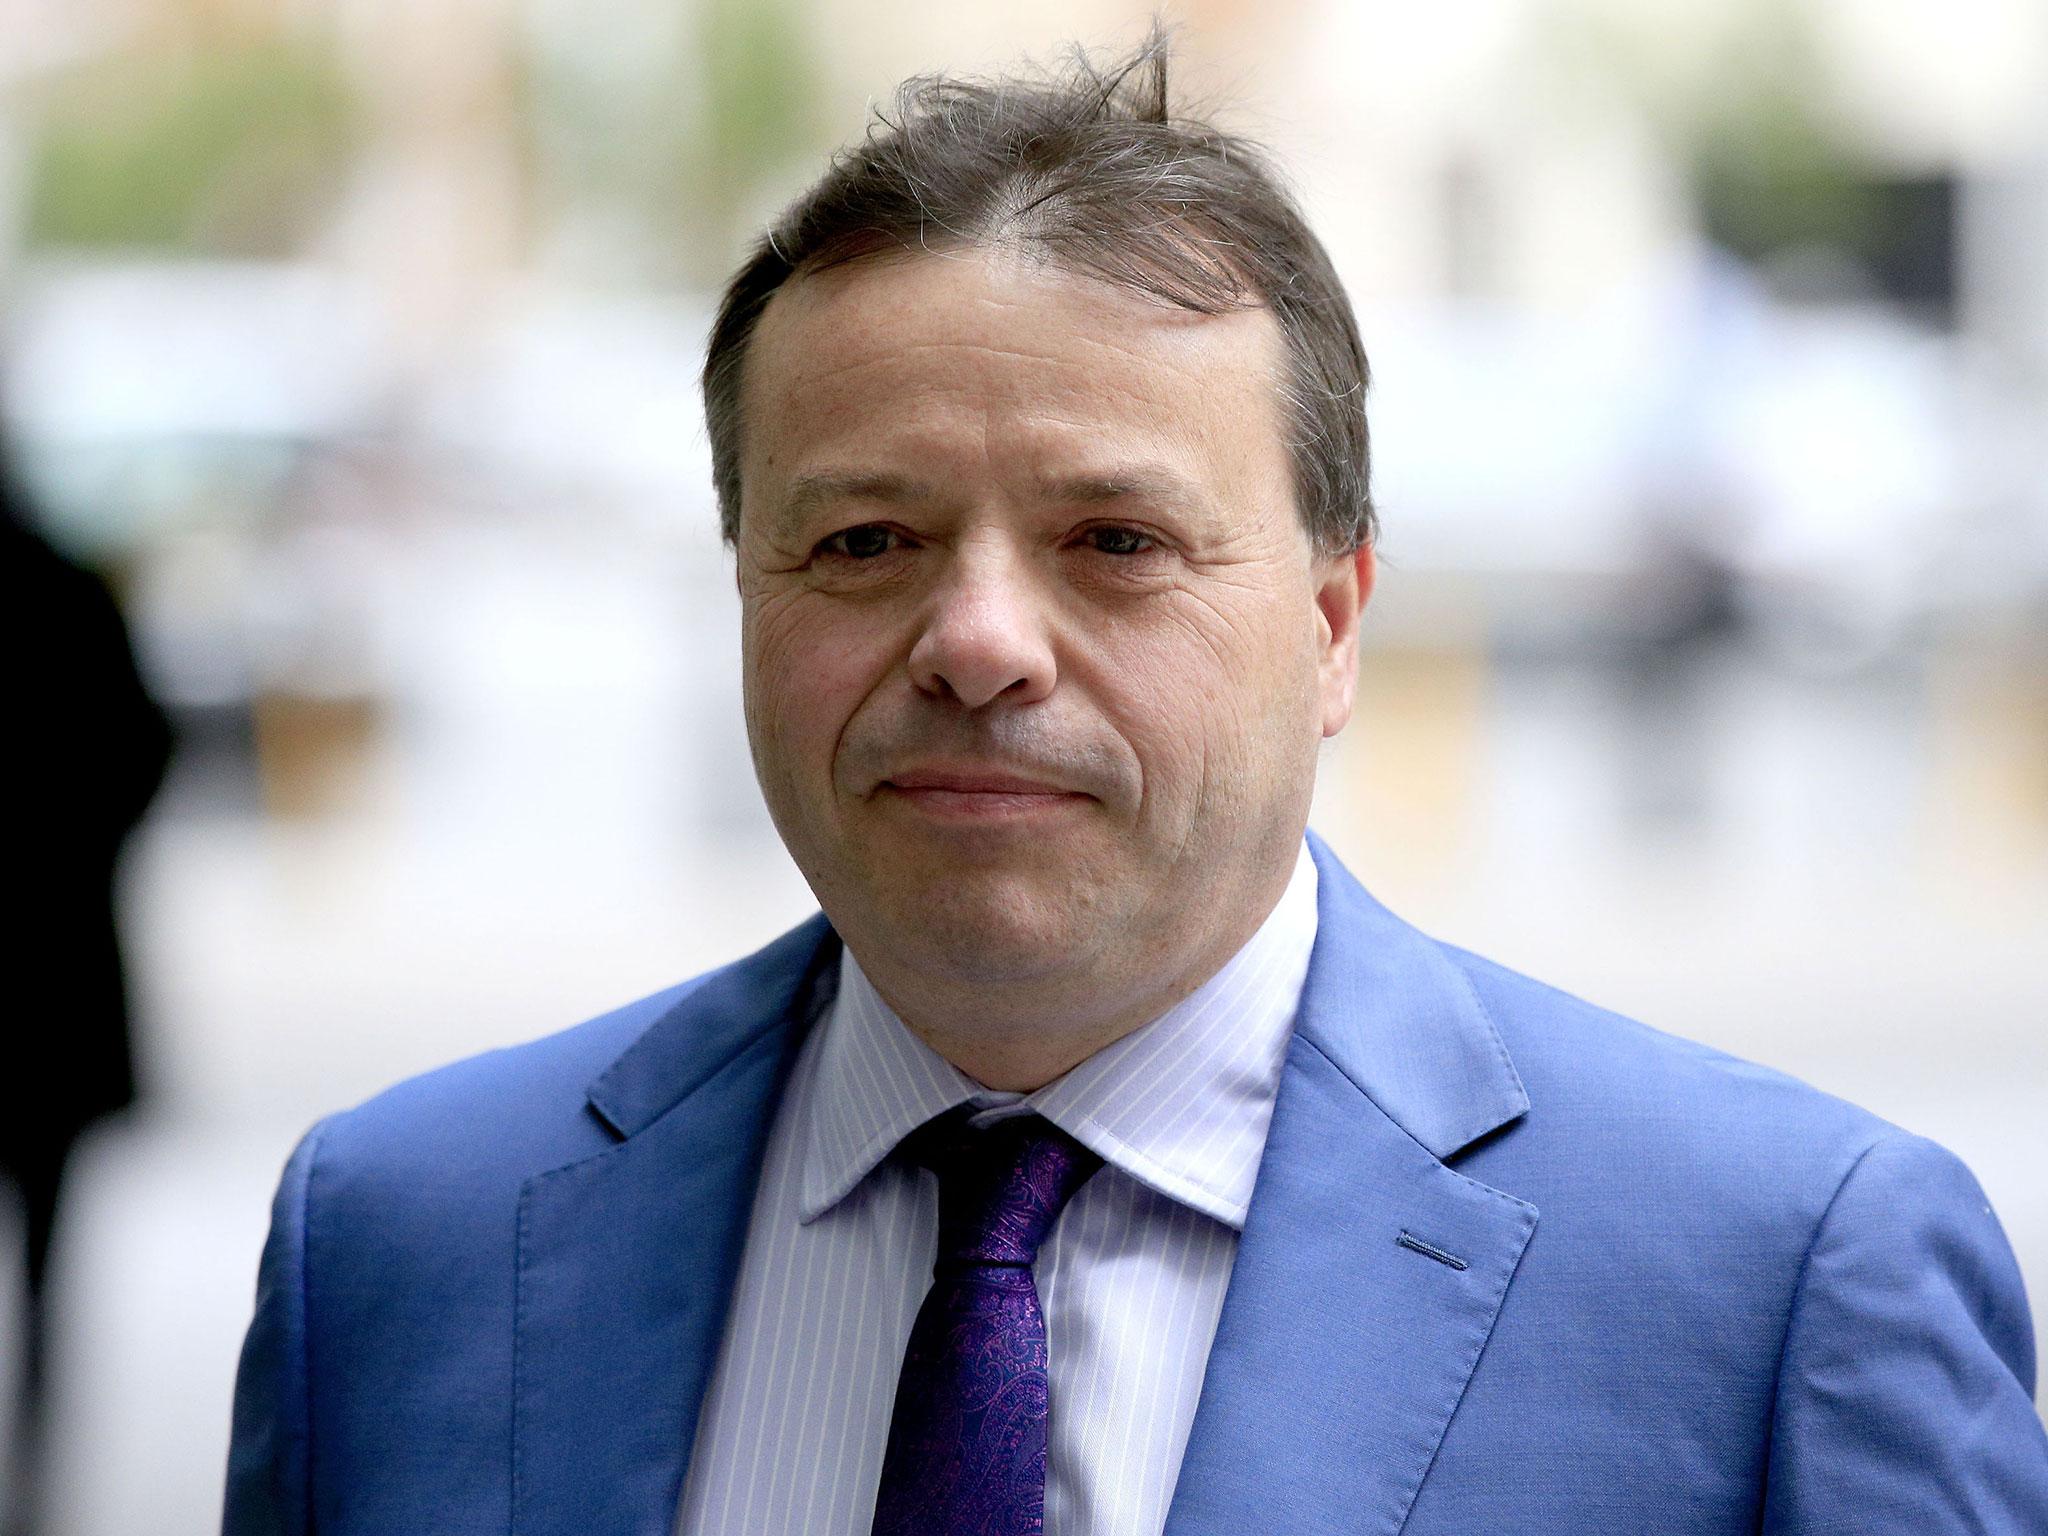 Arron Banks said Nigel Farage would have a ‘more fulsome role’ in the party under his stewardship